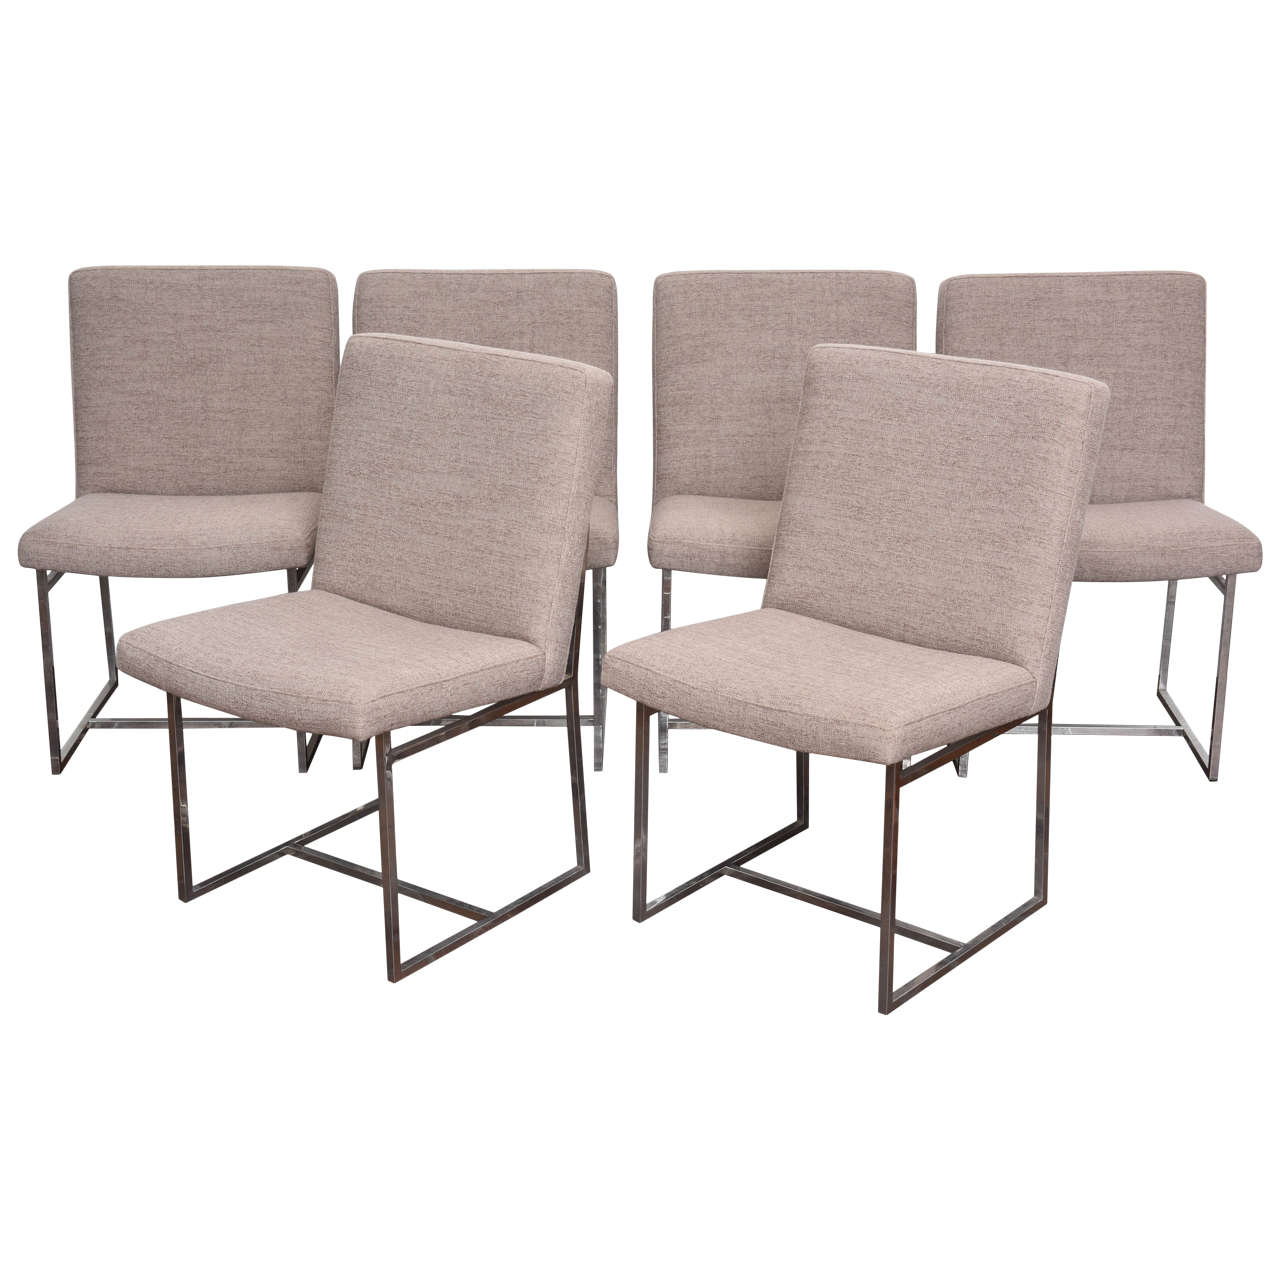 Chrome Framed Dining Chairs by Milo Baughman, S/6 For Sale